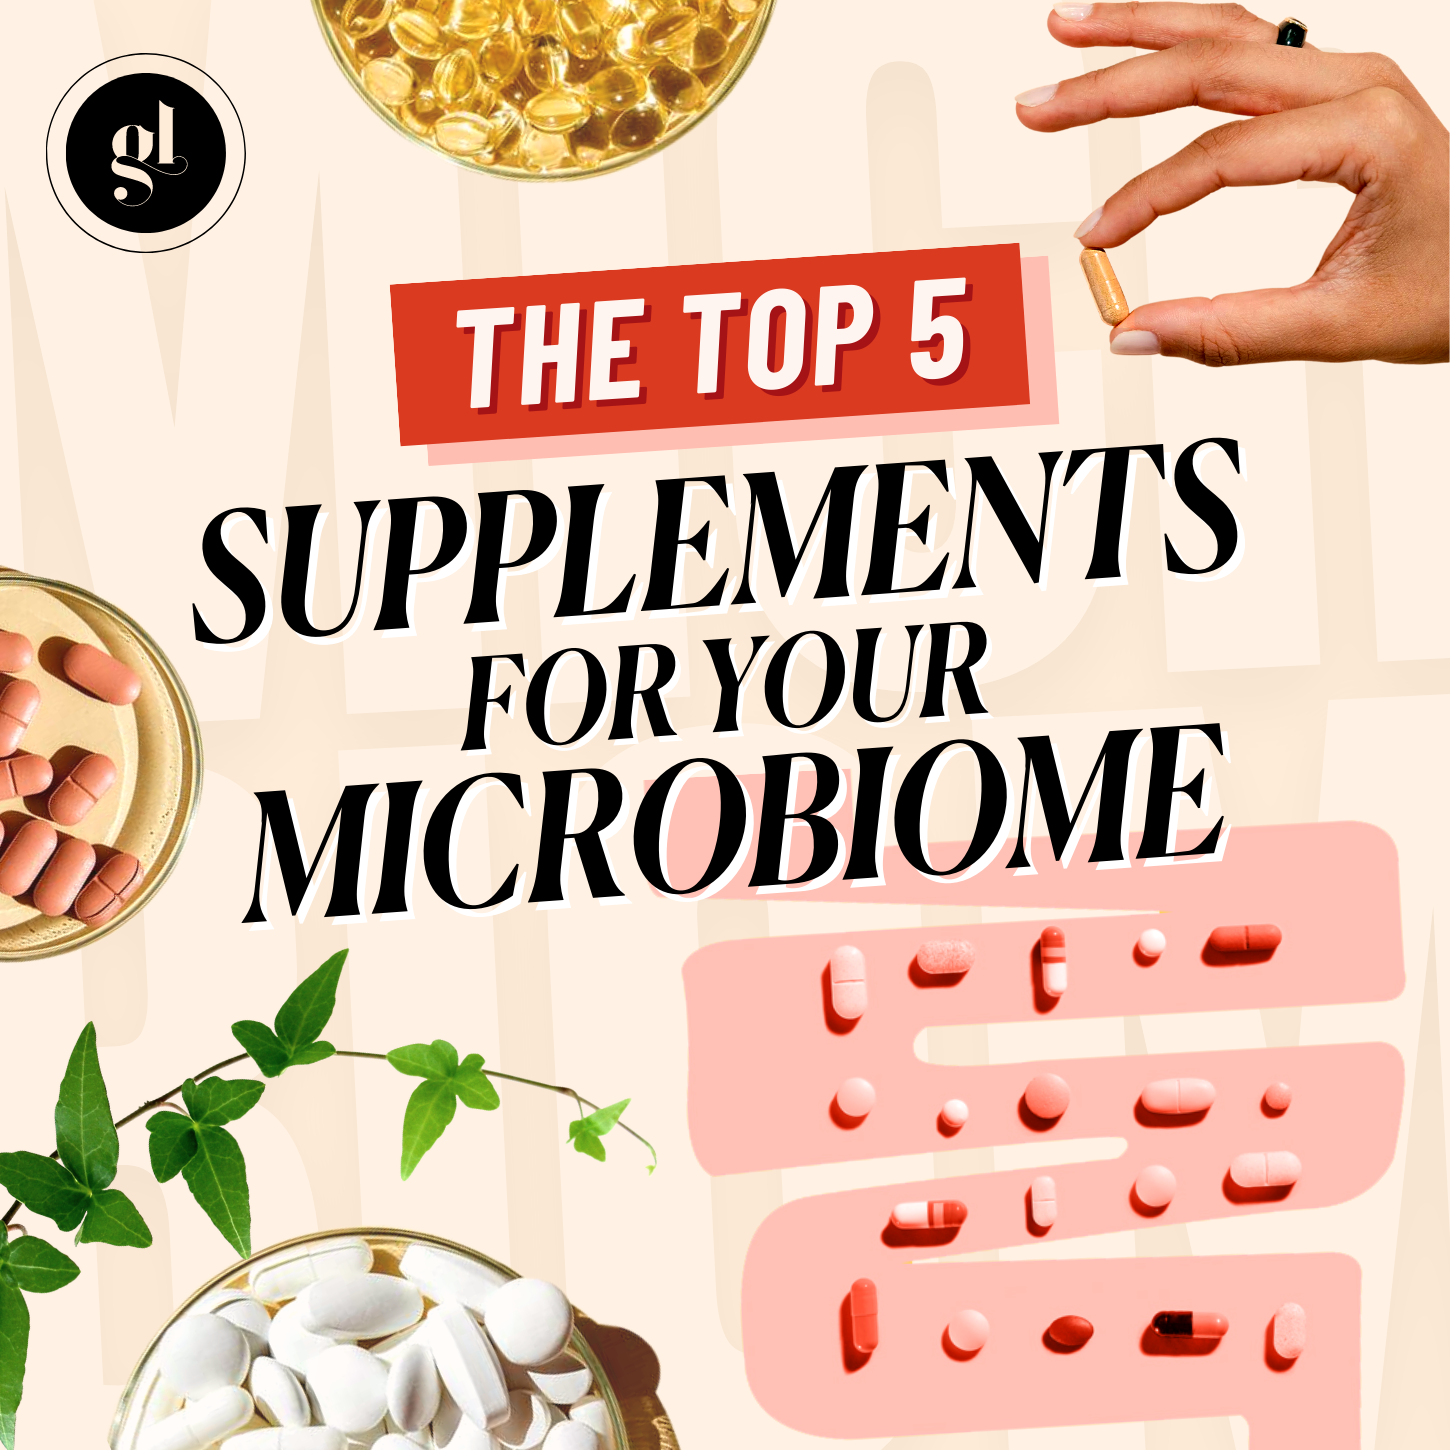 The Top 5 Supplements for Your Microbiome